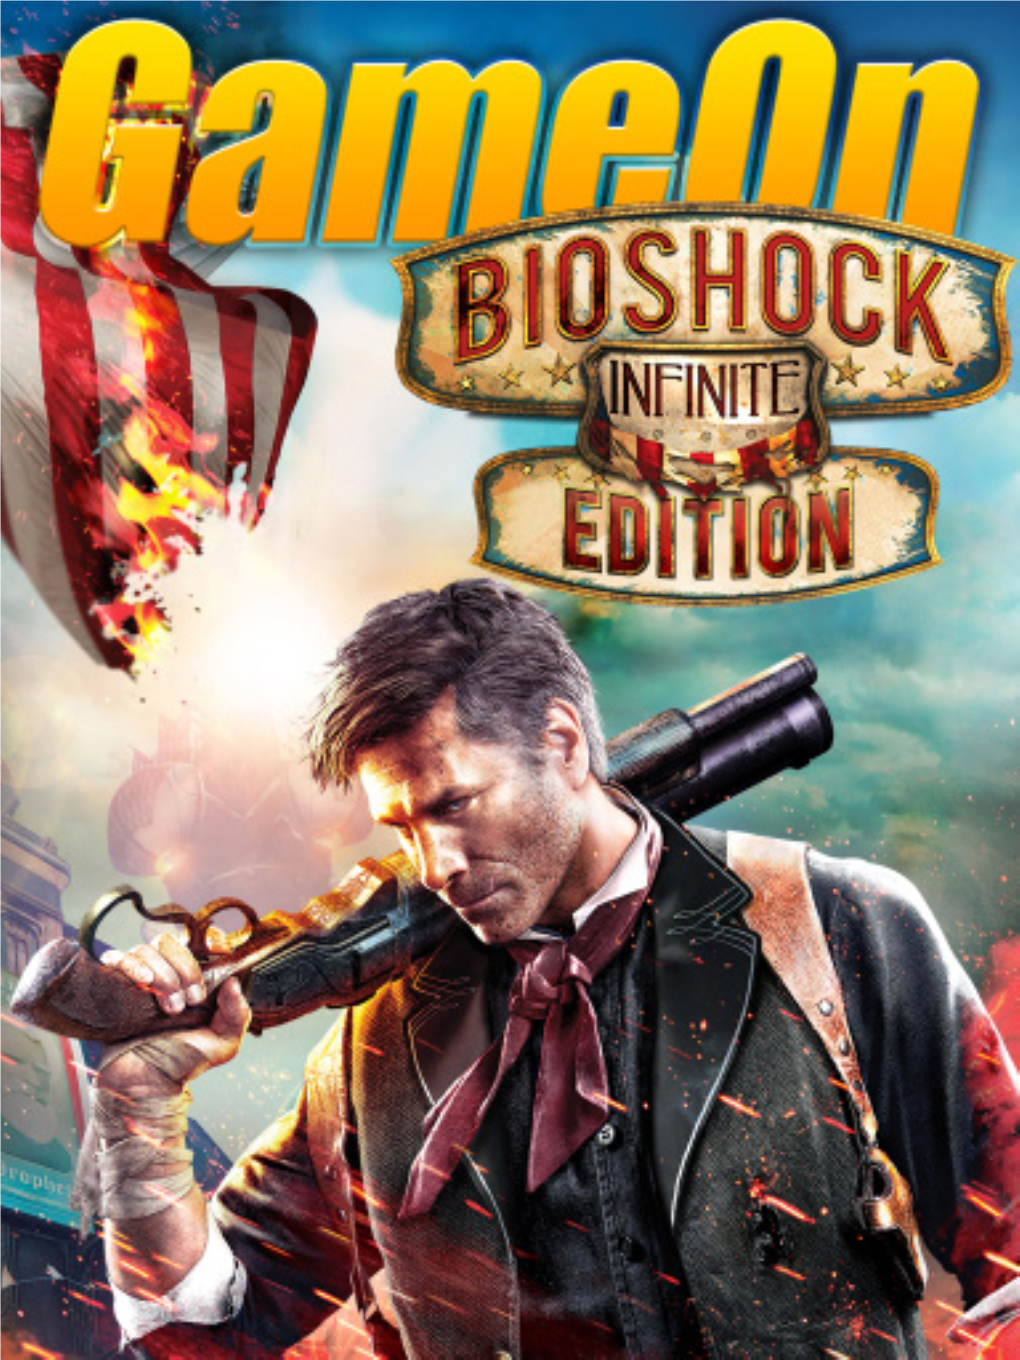 1 • Gameon Magazine Bioshock Infinite Edition • March 2013 Welcome to Another Super Special Edition of Gameon Magazine, This Time Focusing on the Bioshock Franchise